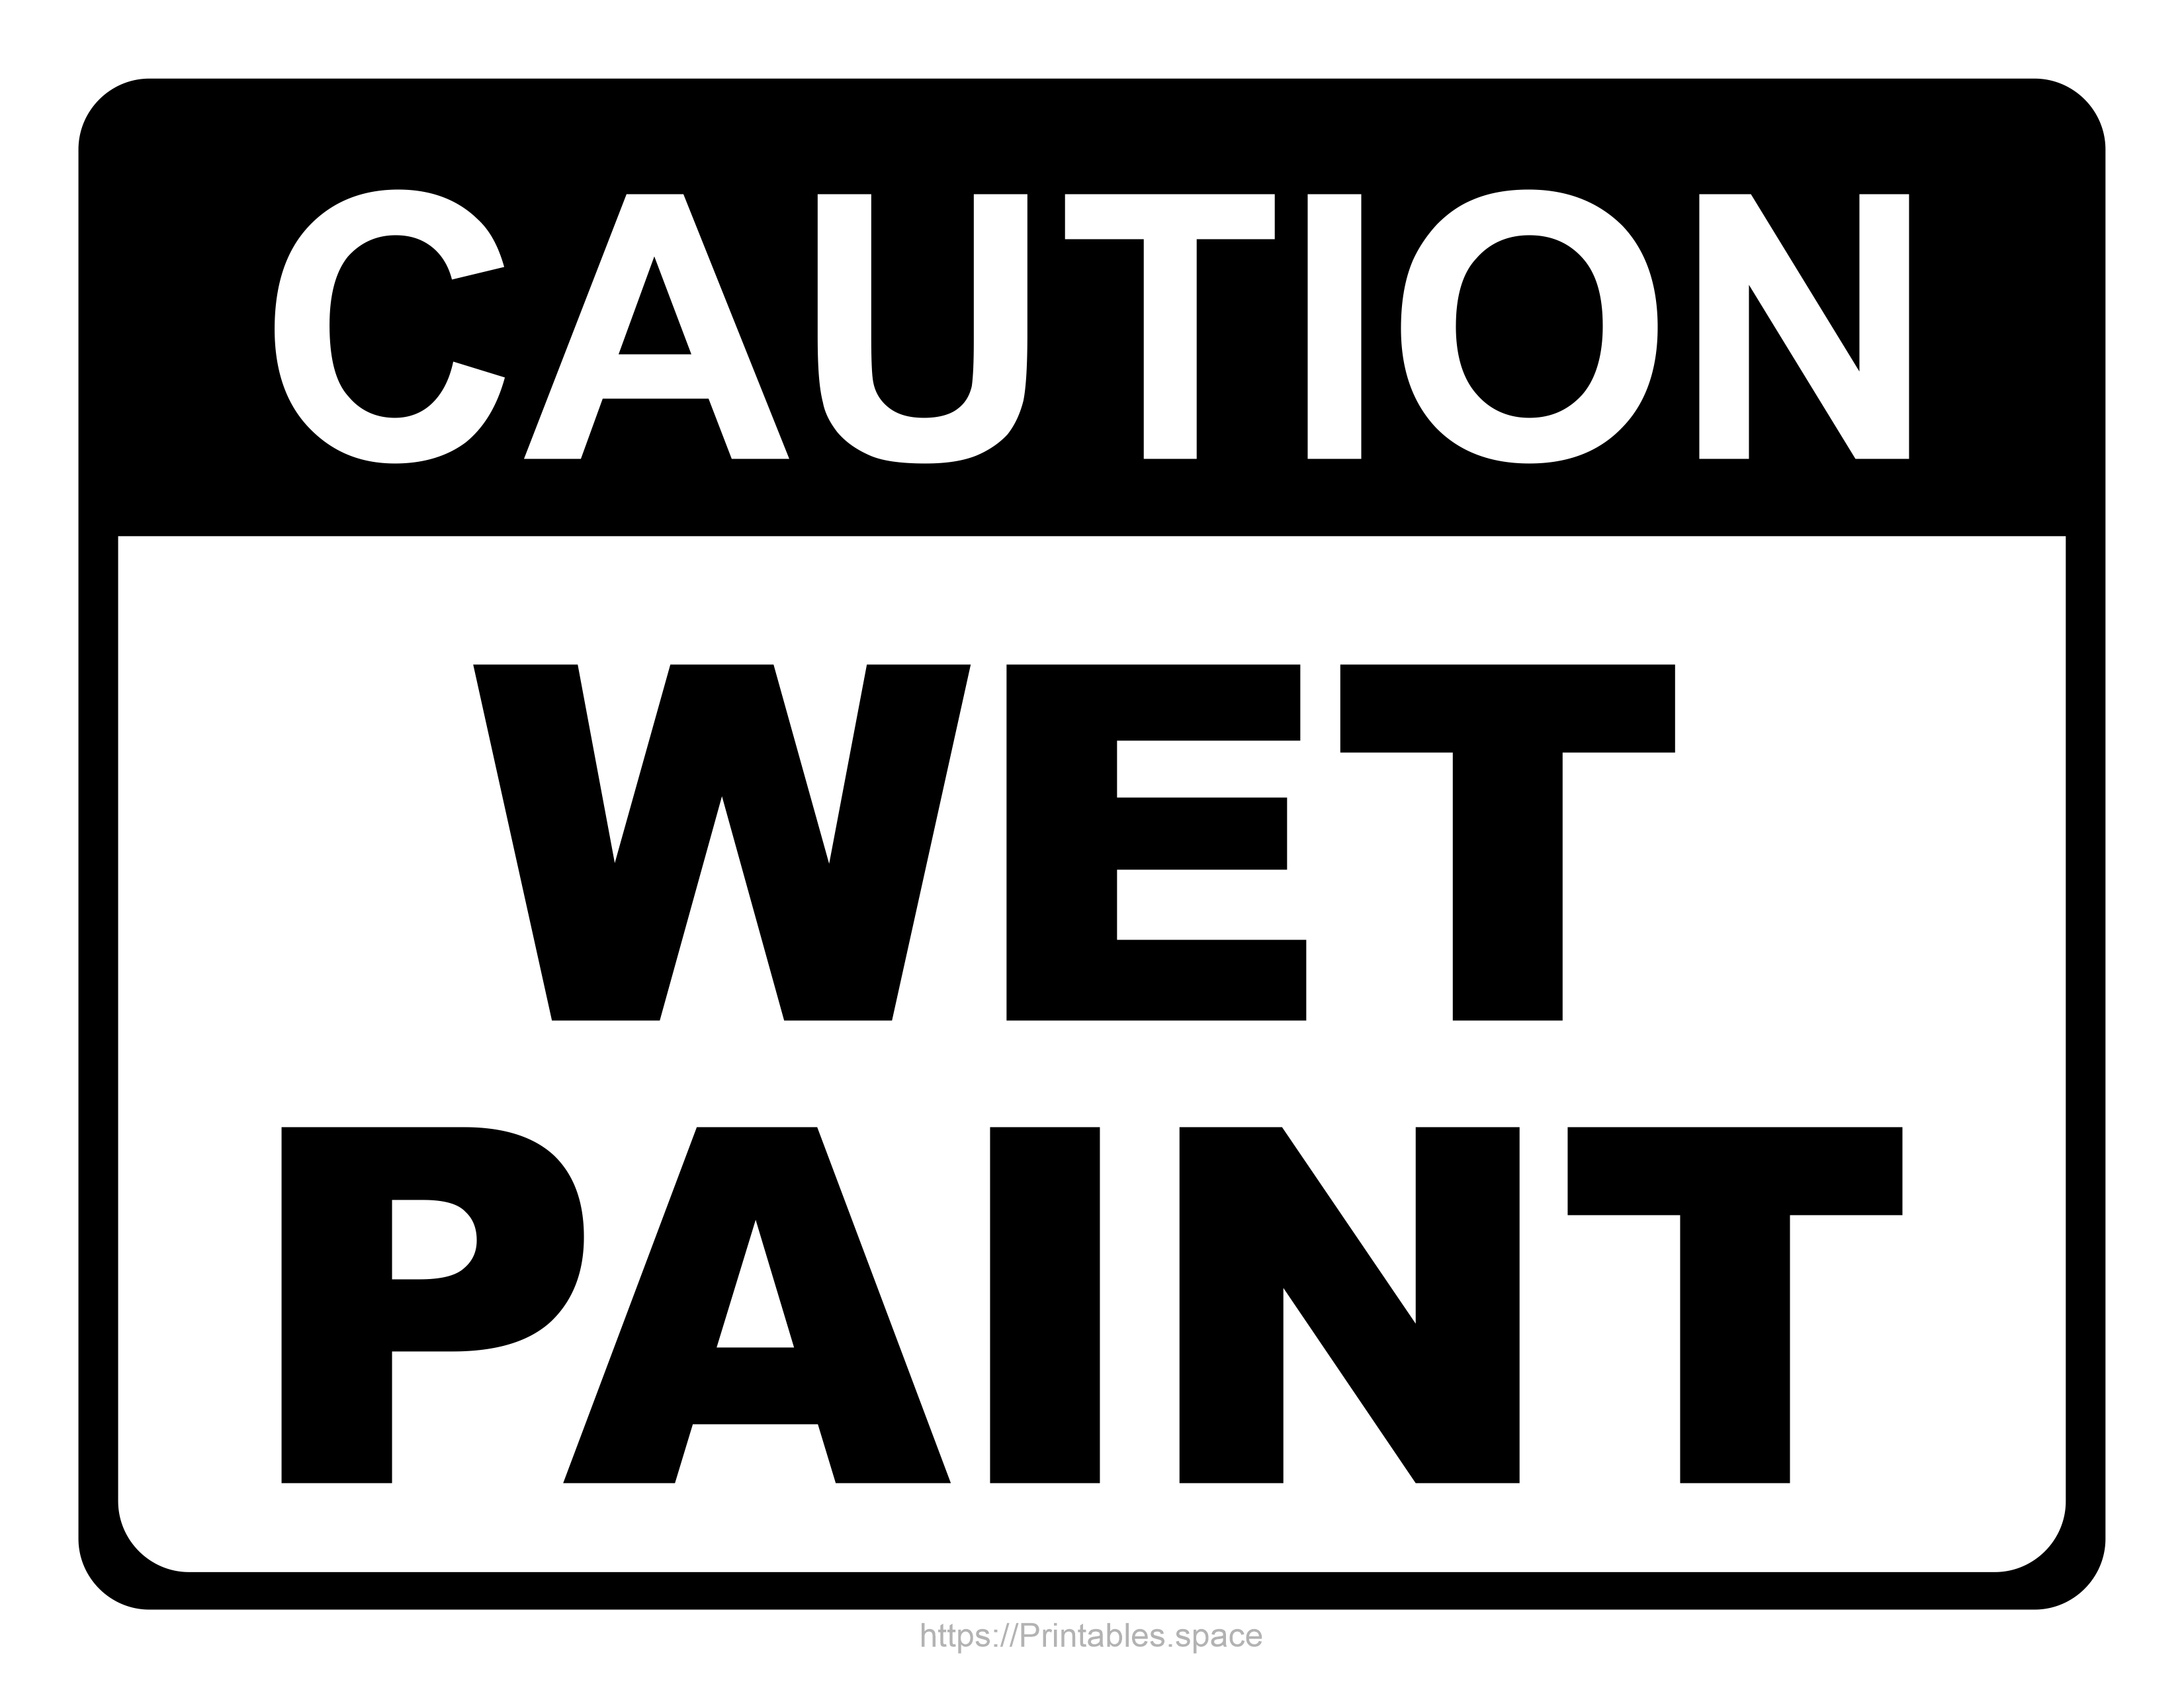 Caution! Wet Paint! Printable Sign - Free Printables